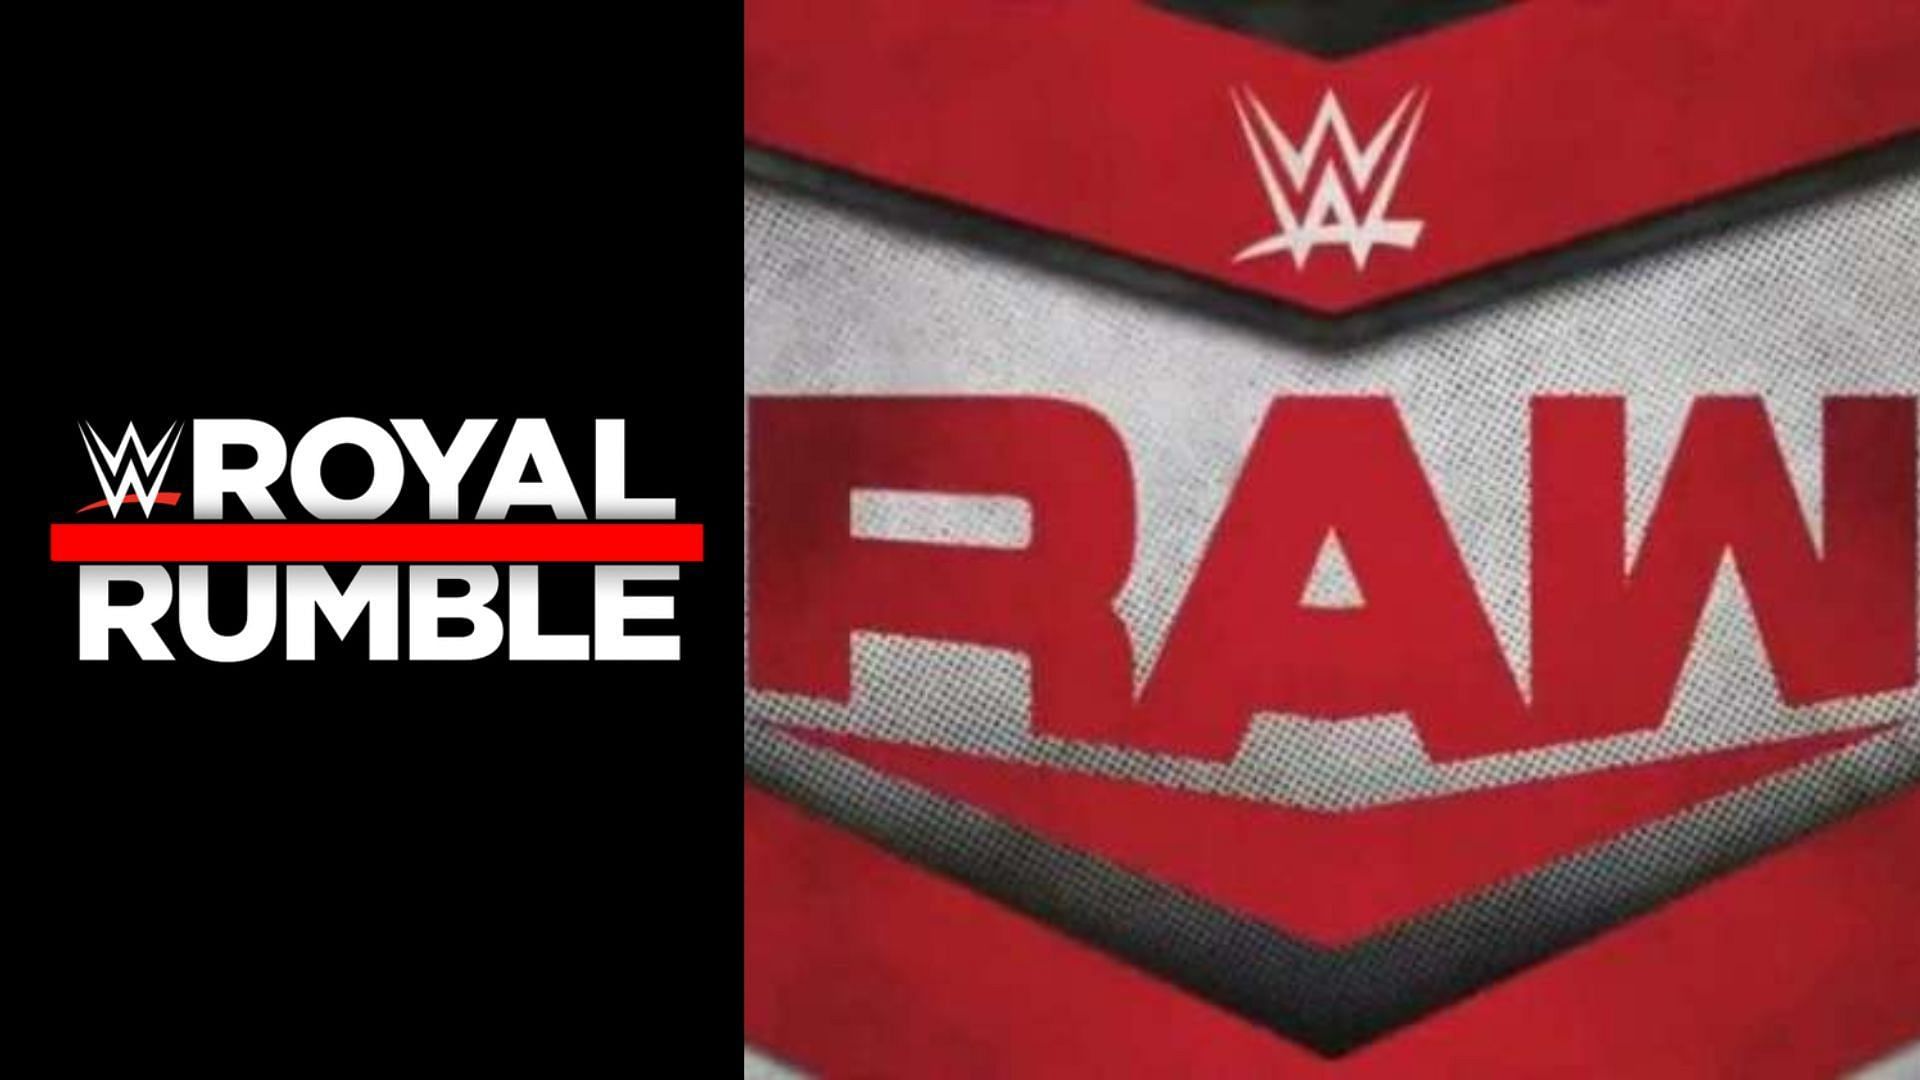 RAW Superstar is likely to return at the Royal Rumble